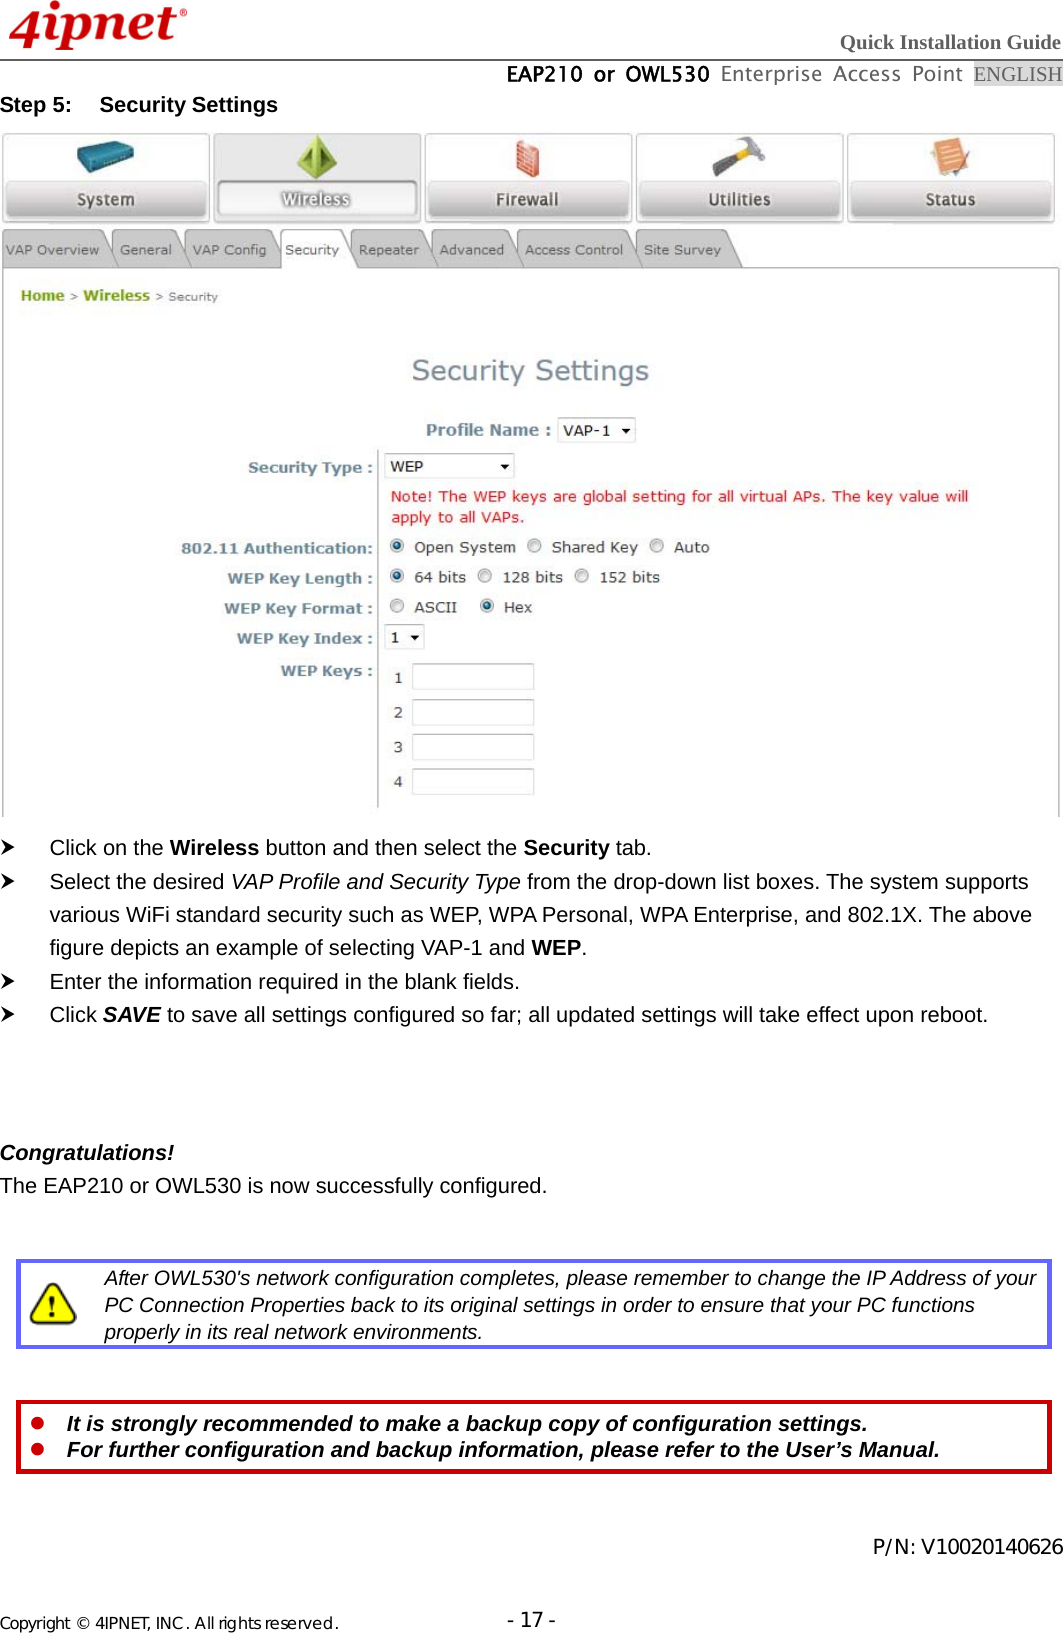  Quick Installation Guide  EAP210 or OWL530 Enterprise Access Point ENGLISH Copyright © 4IPNET, INC. All rights reserved.                       - 17 -Step 5:  Security Settings    Click on the Wireless button and then select the Security tab.   Select the desired VAP Profile and Security Type from the drop-down list boxes. The system supports various WiFi standard security such as WEP, WPA Personal, WPA Enterprise, and 802.1X. The above figure depicts an example of selecting VAP-1 and WEP.    Enter the information required in the blank fields.    Click SAVE to save all settings configured so far; all updated settings will take effect upon reboot.    Congratulations! The EAP210 or OWL530 is now successfully configured.    After OWL530&apos;s network configuration completes, please remember to change the IP Address of your PC Connection Properties back to its original settings in order to ensure that your PC functions properly in its real network environments.    It is strongly recommended to make a backup copy of configuration settings.  For further configuration and backup information, please refer to the User’s Manual.   P/N: V10020140626 